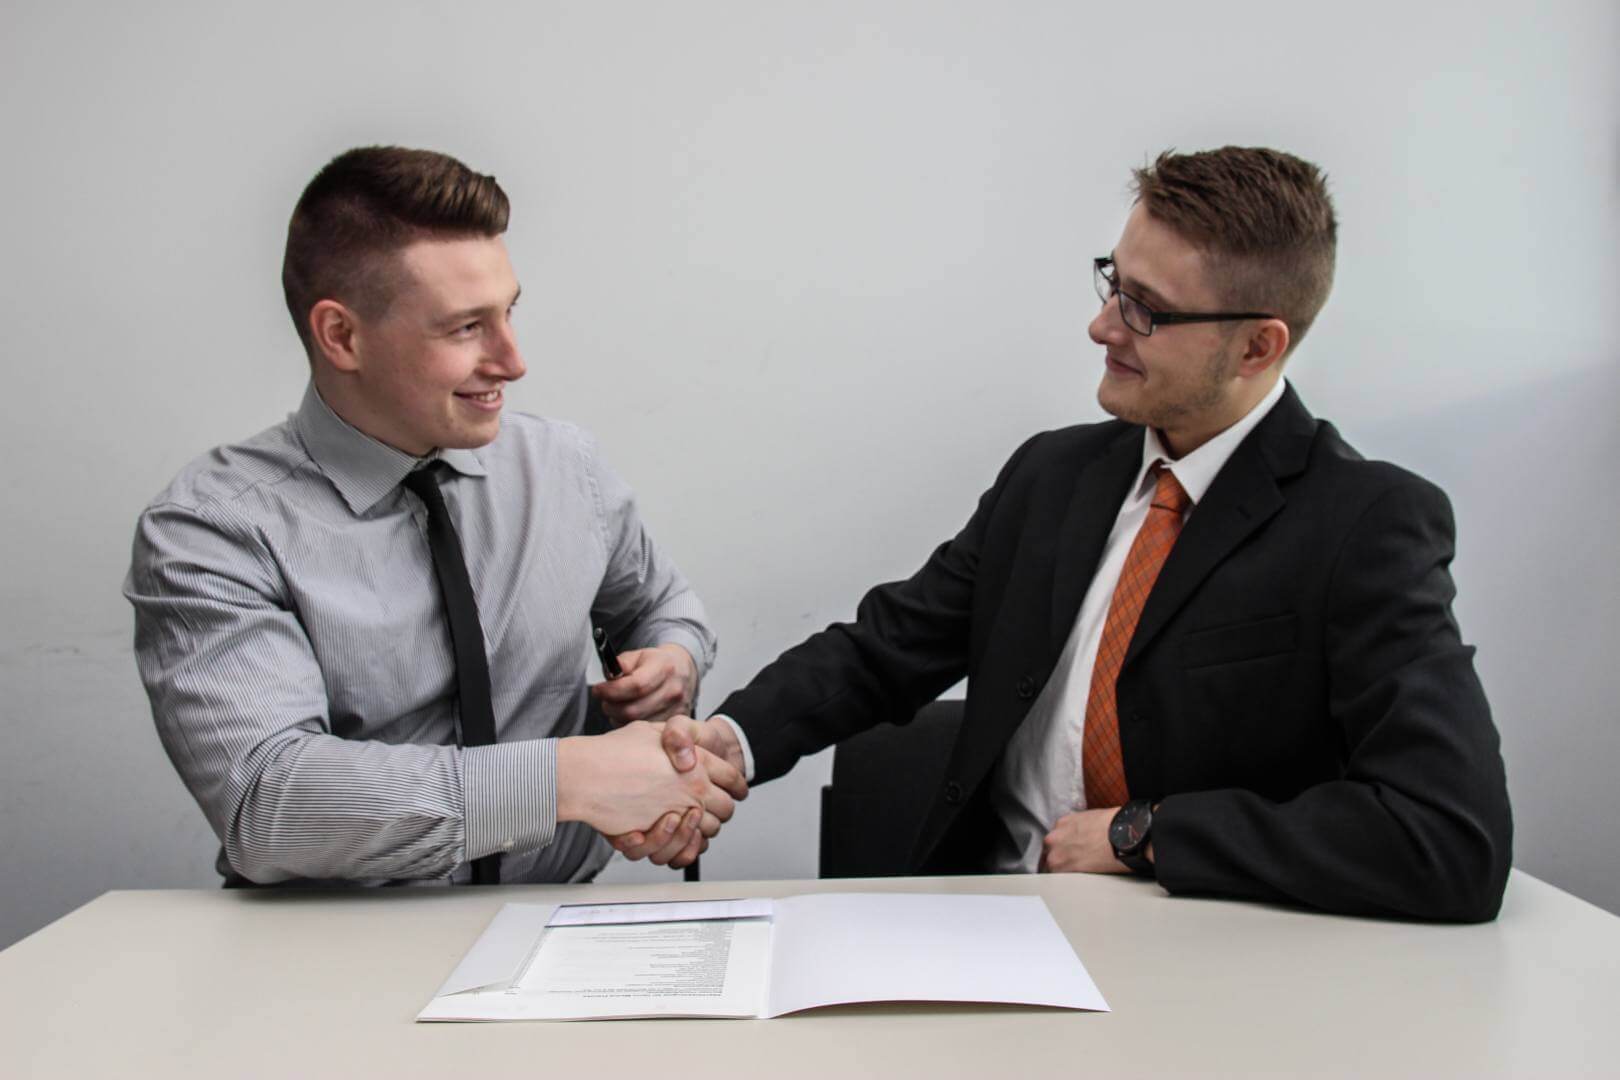 image of job interview after hiring professional resume writers to do technical resume